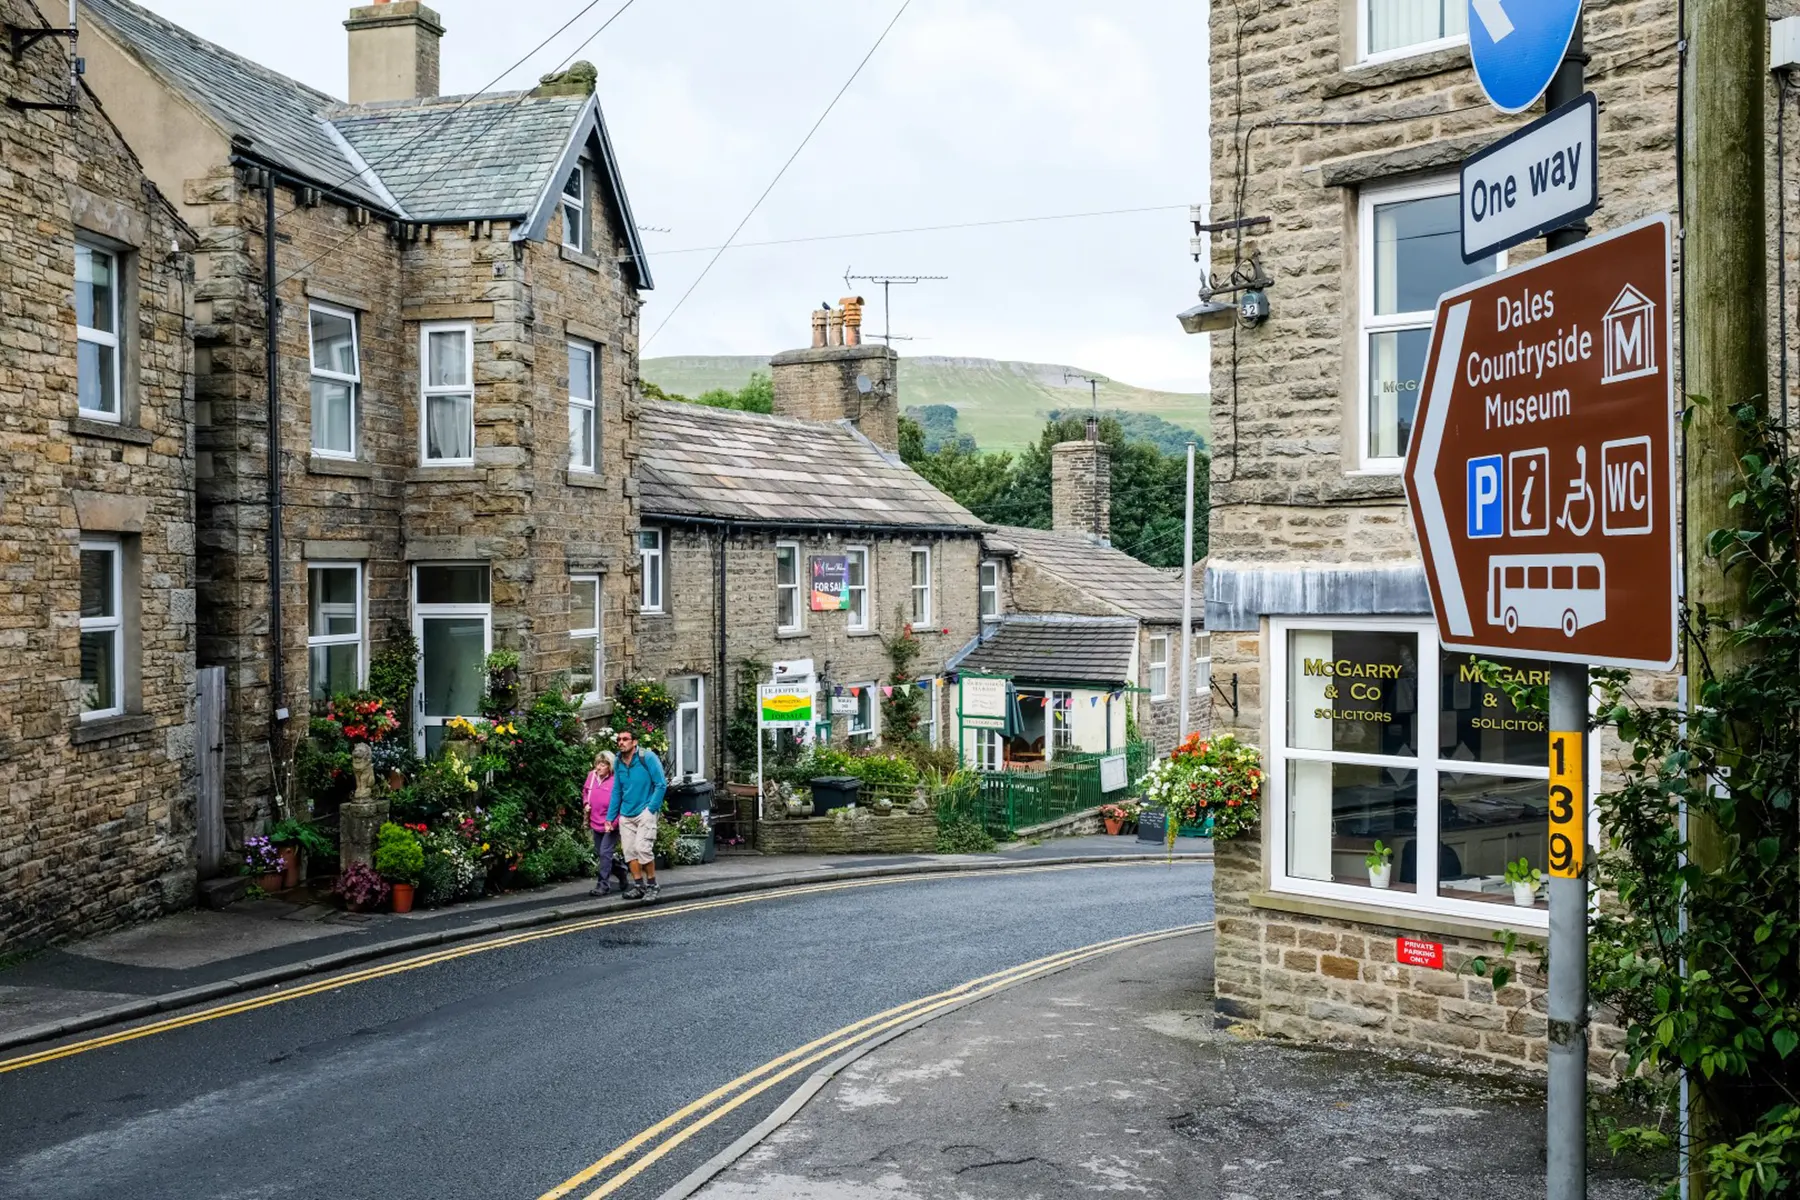 Hawes, a pretty dales town in North Yorkshire